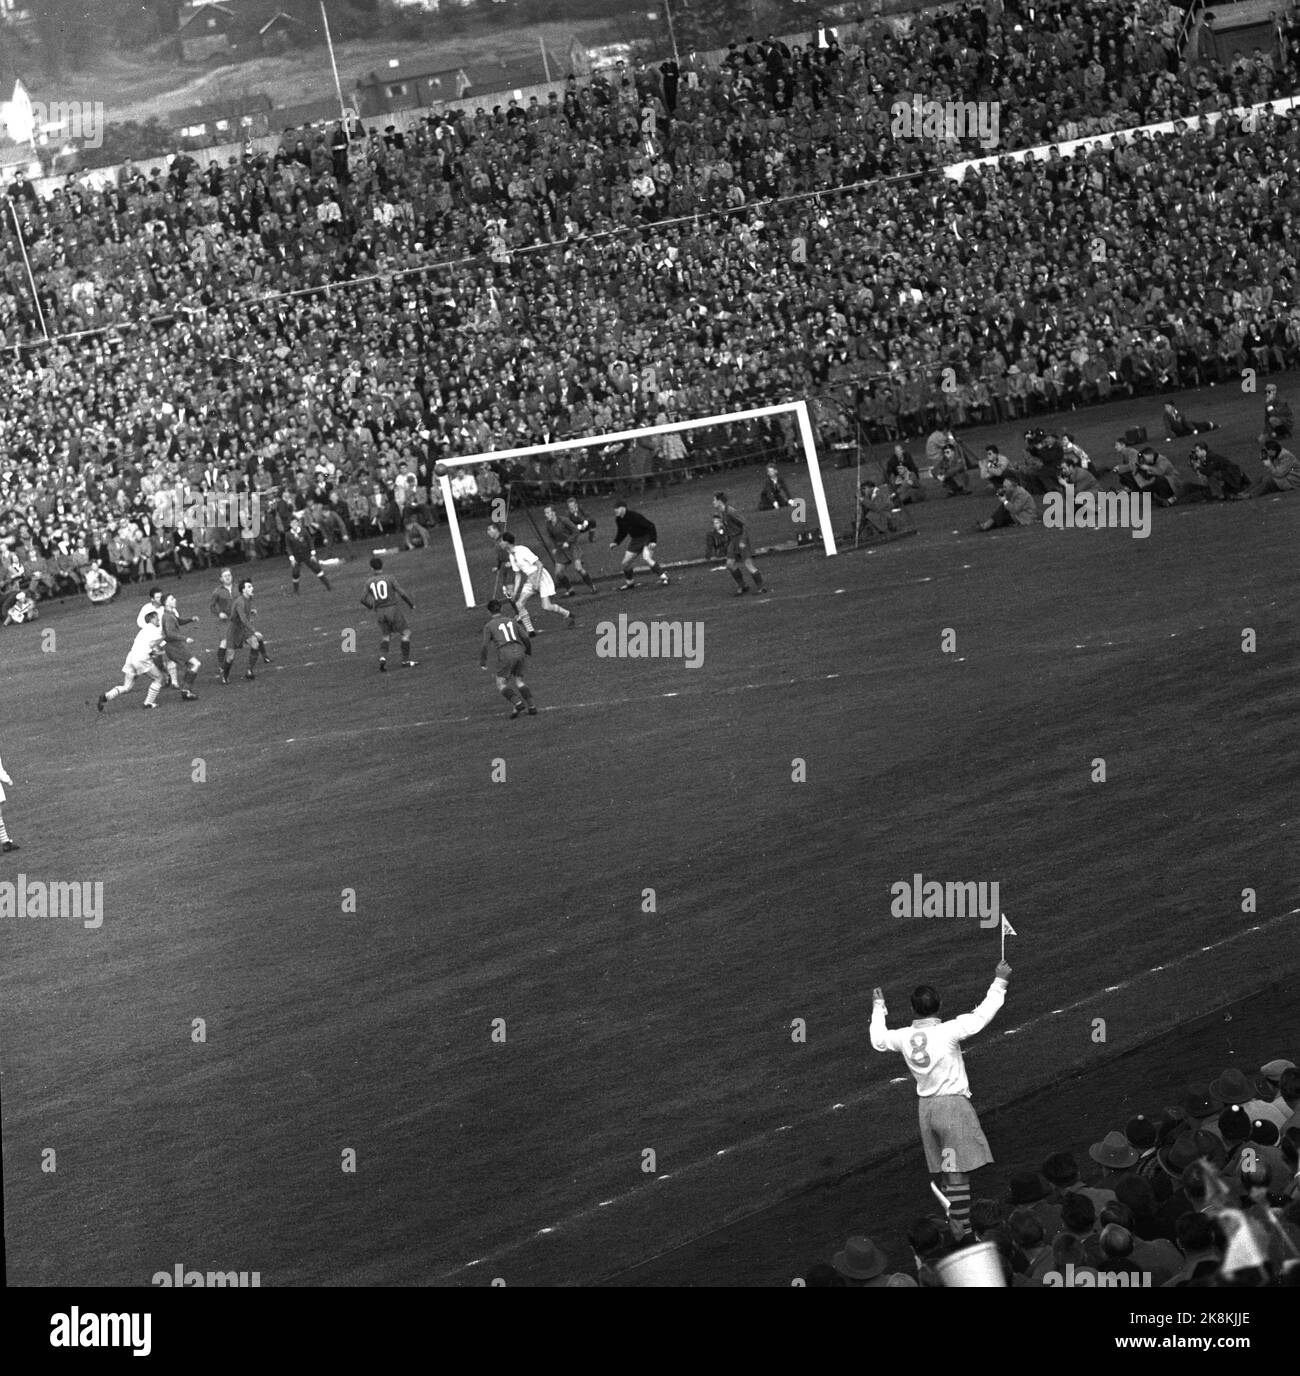 Oslo, 19561021. The cup final at Ullevaal Stadium. Larvik Turn - Skeid 1-2. Here's chance in front of that one goal. Larvik Turn trailer in front fans with a pennant. Photo: Current / NTB Stock Photo